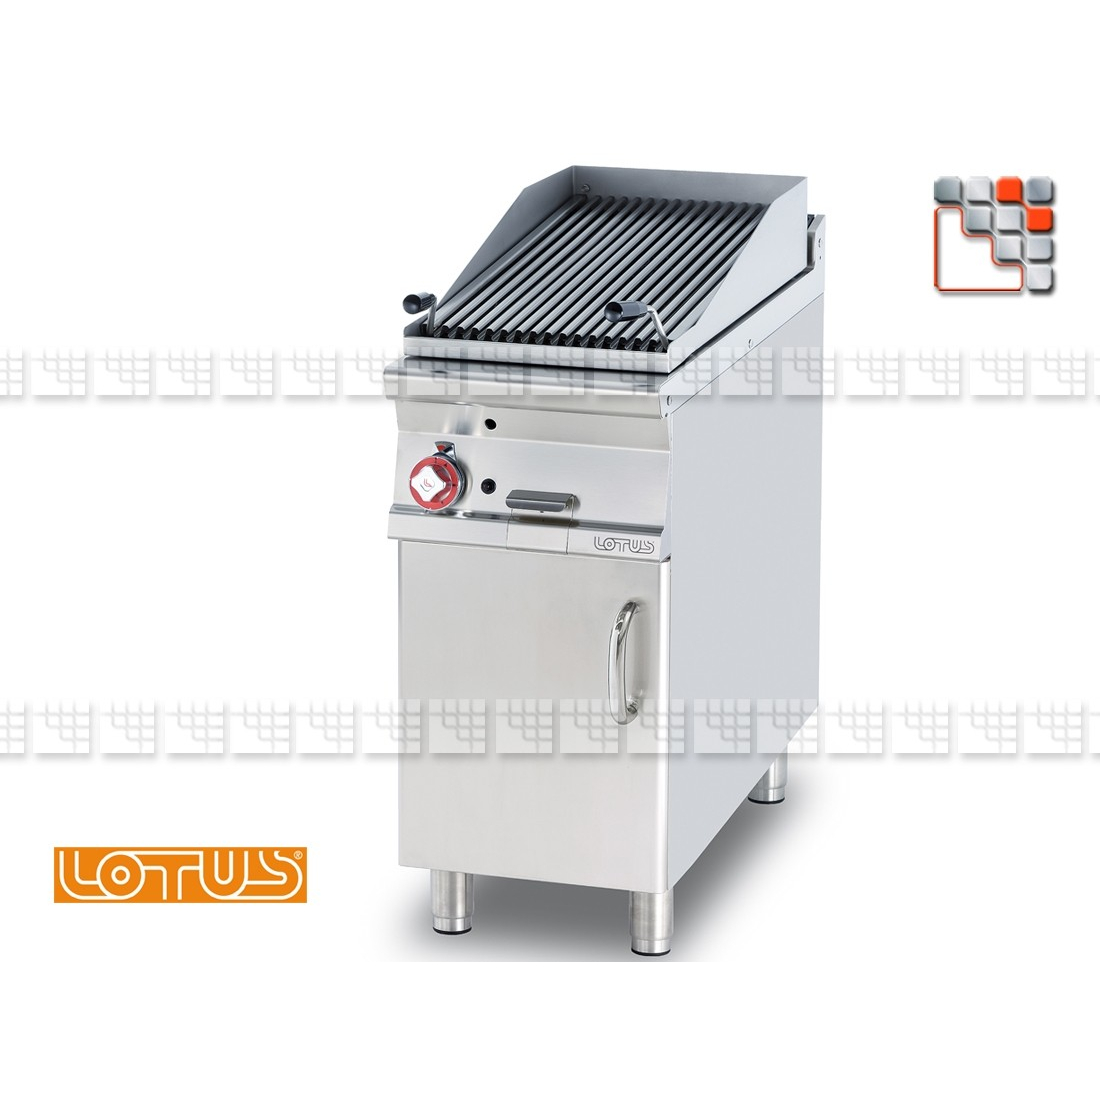 Gas grill on stainless steel cabinet SuperLotus L23-CW74G LOTUS® Food Catering Equipment Royal Nova Bras Grill Parillas